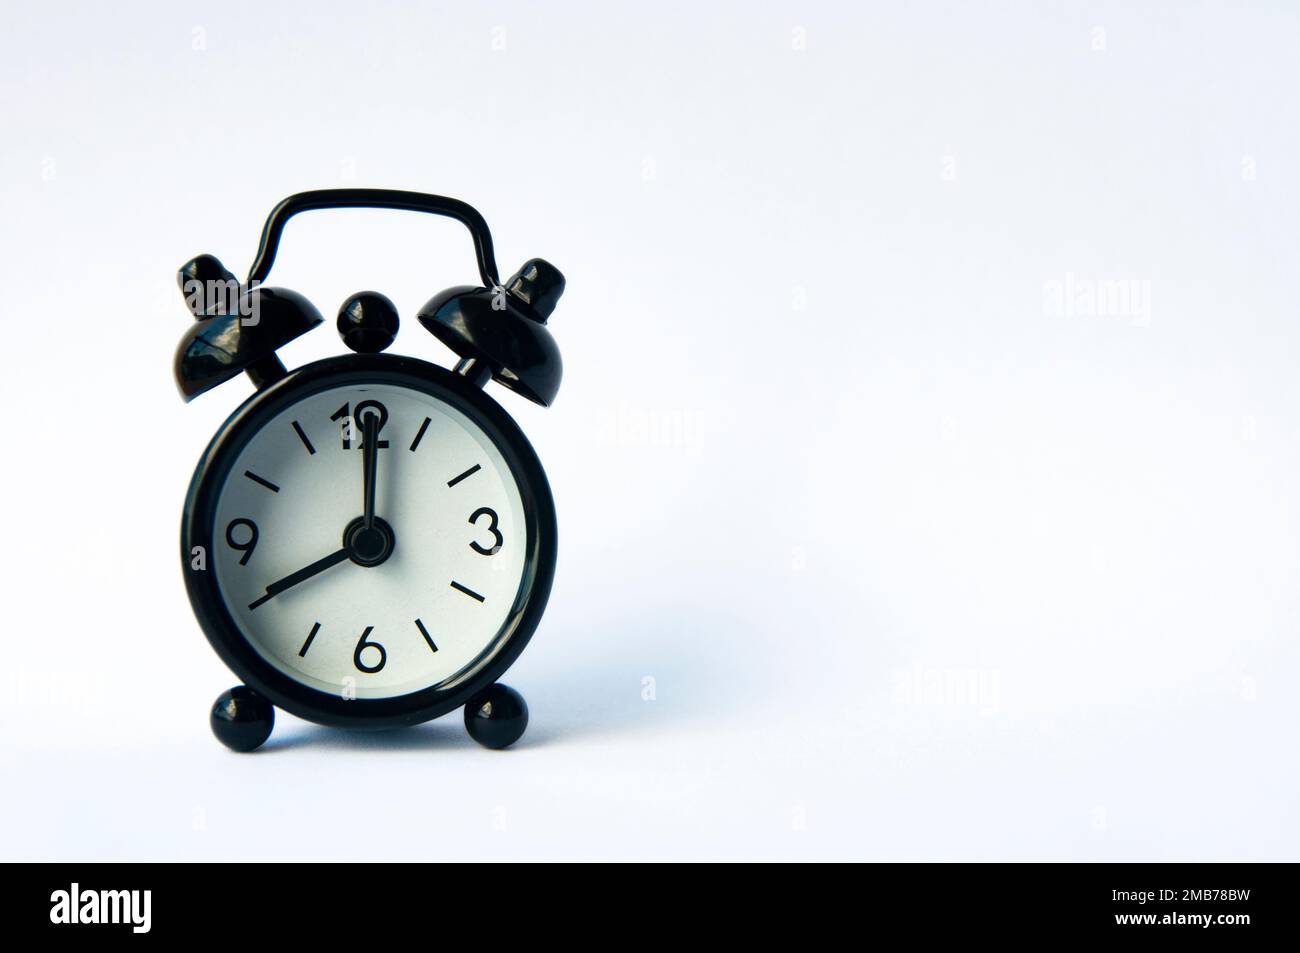 Black alarm clock on nature background with copy space Stock Photo